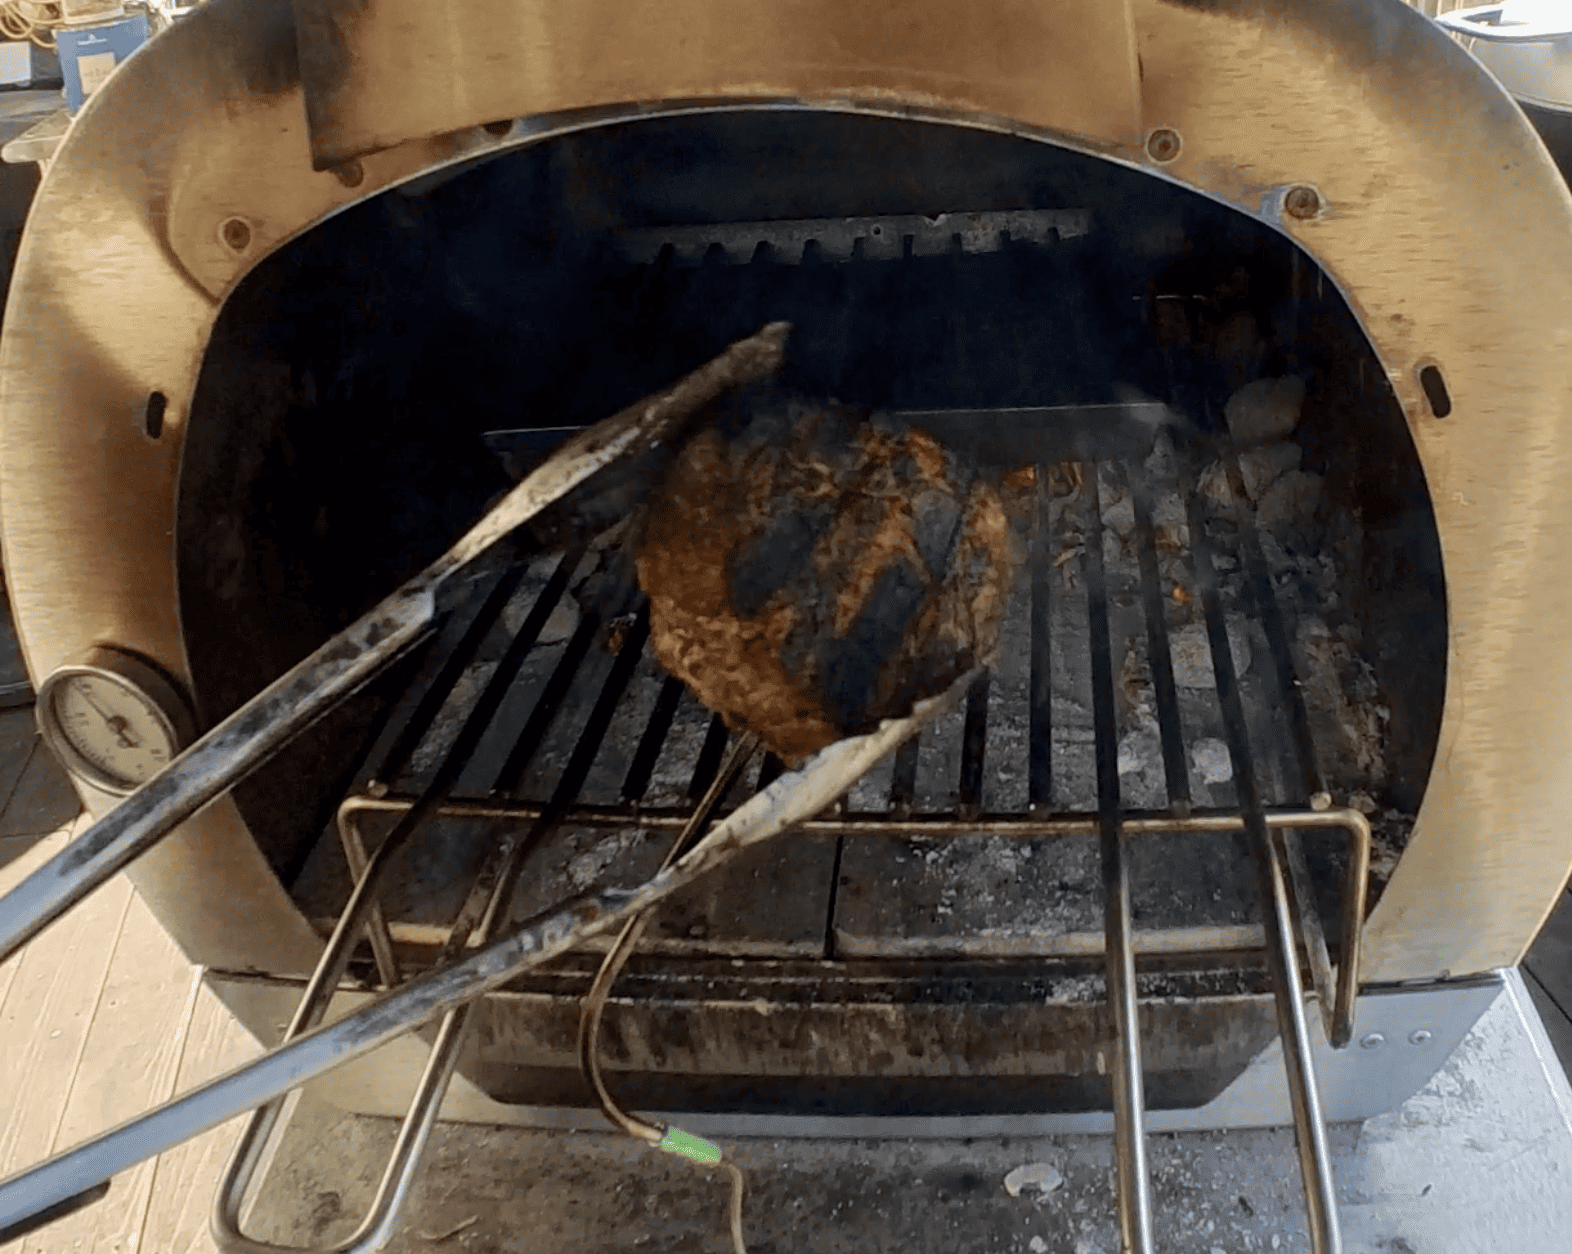 a charred steak with temperature probe cooked in outdoor oven